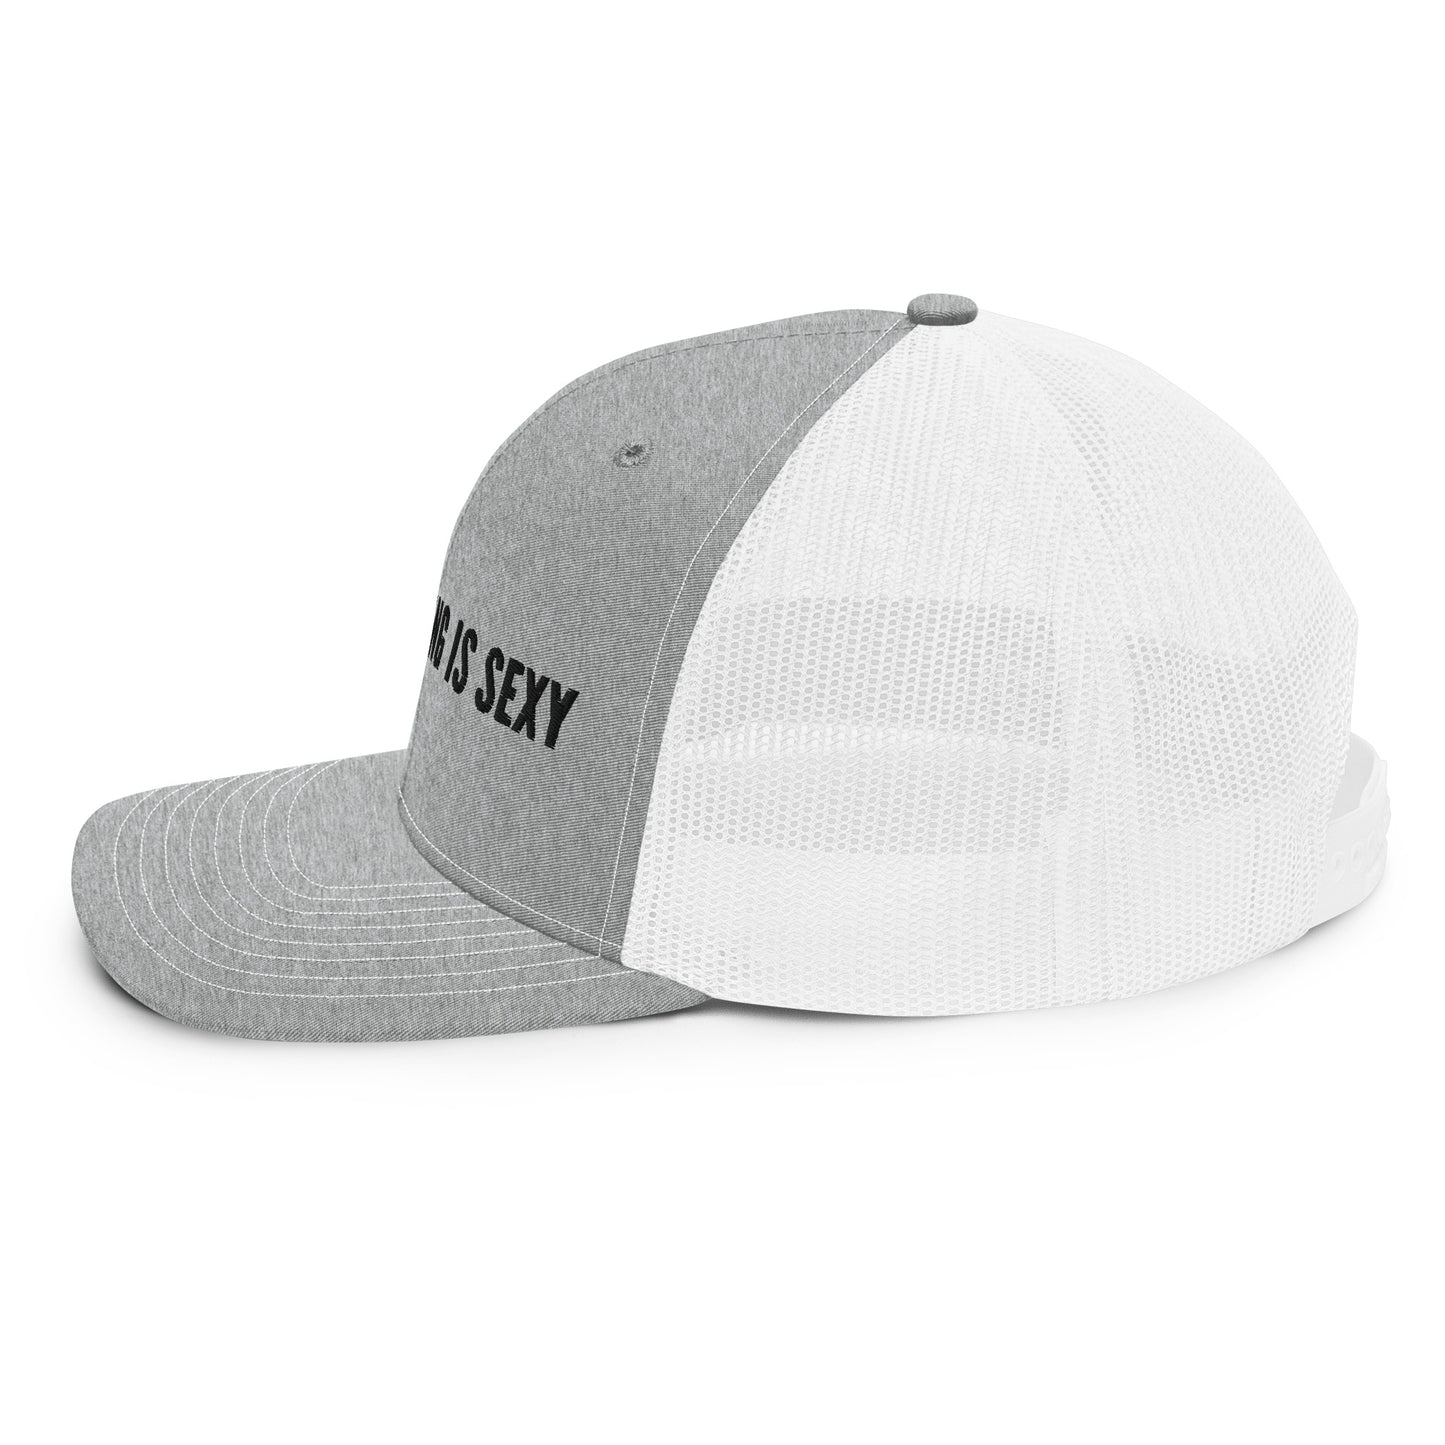 Manufacturing is sexy - Trucker Cap